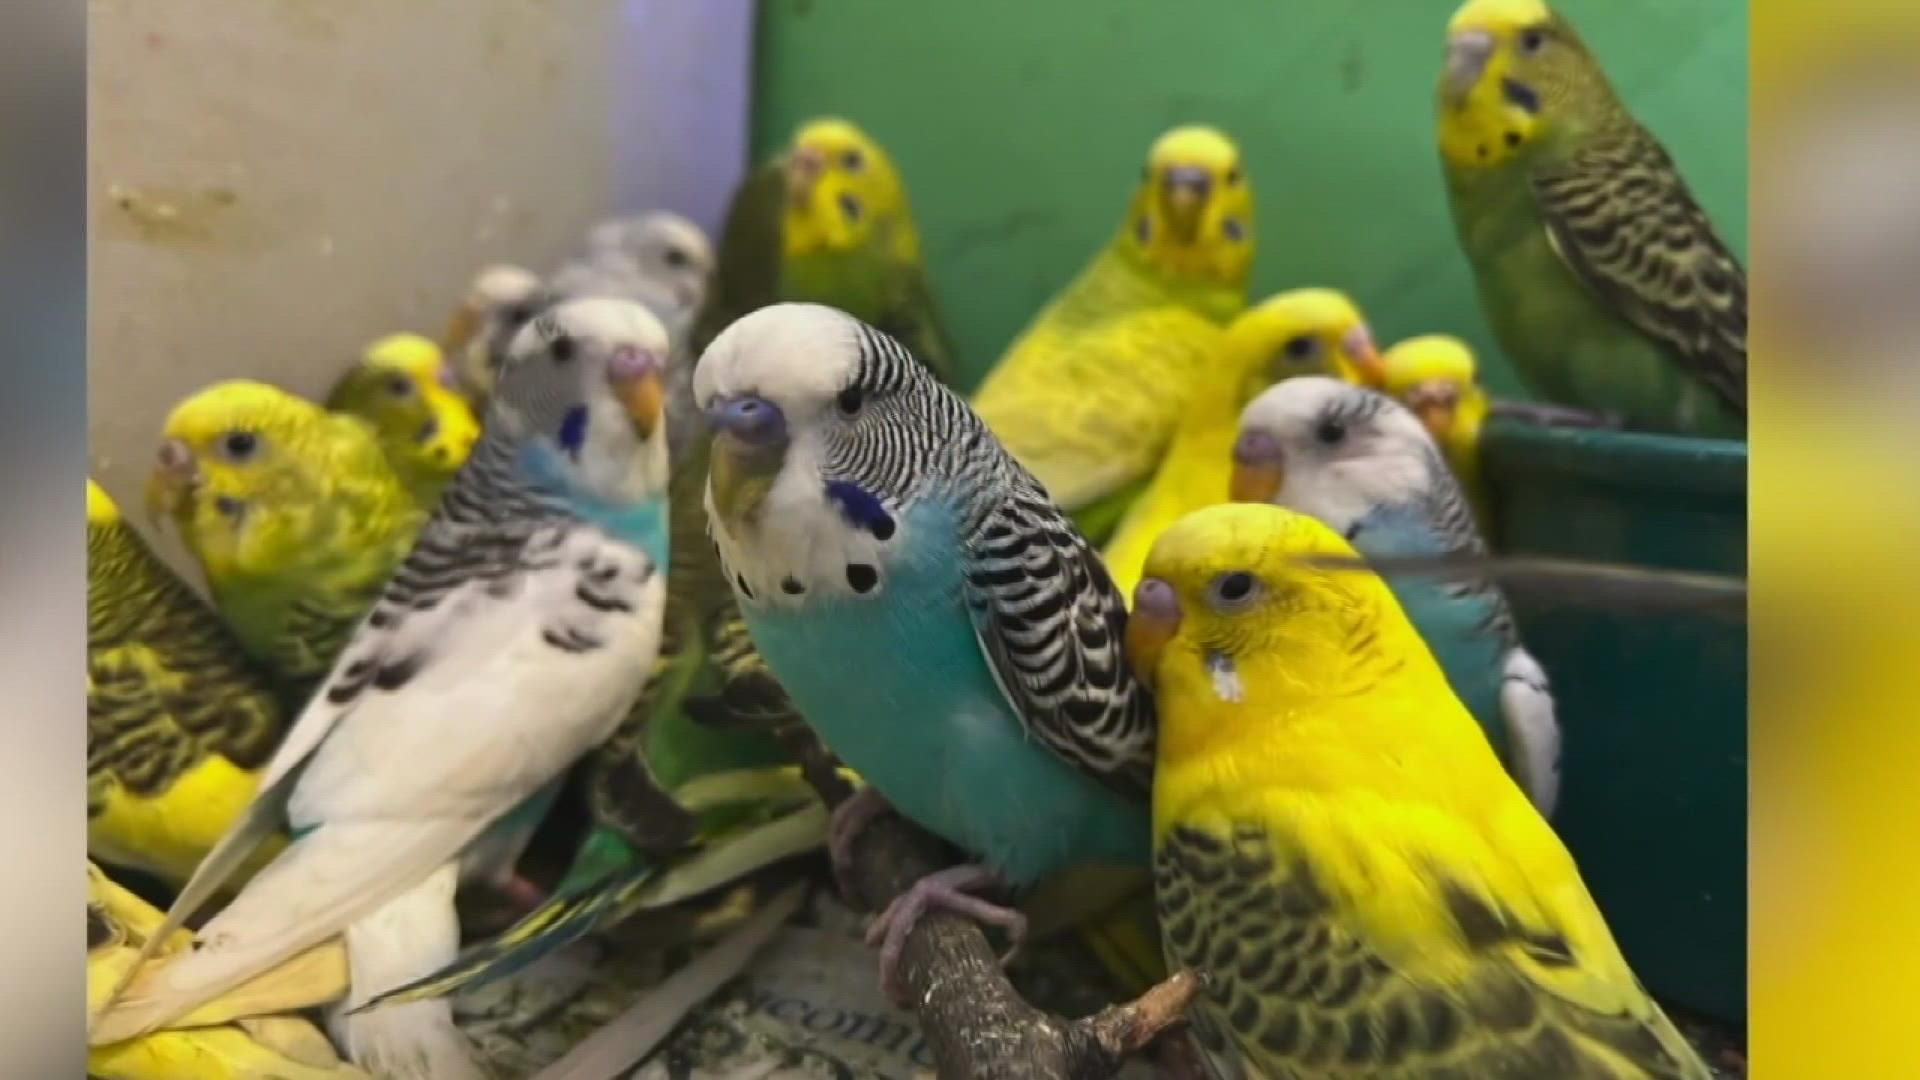 The son of a Macomb County man surrendered more than 800 parakeets, and now animal welfare workers are asking for your help caring for the birds.